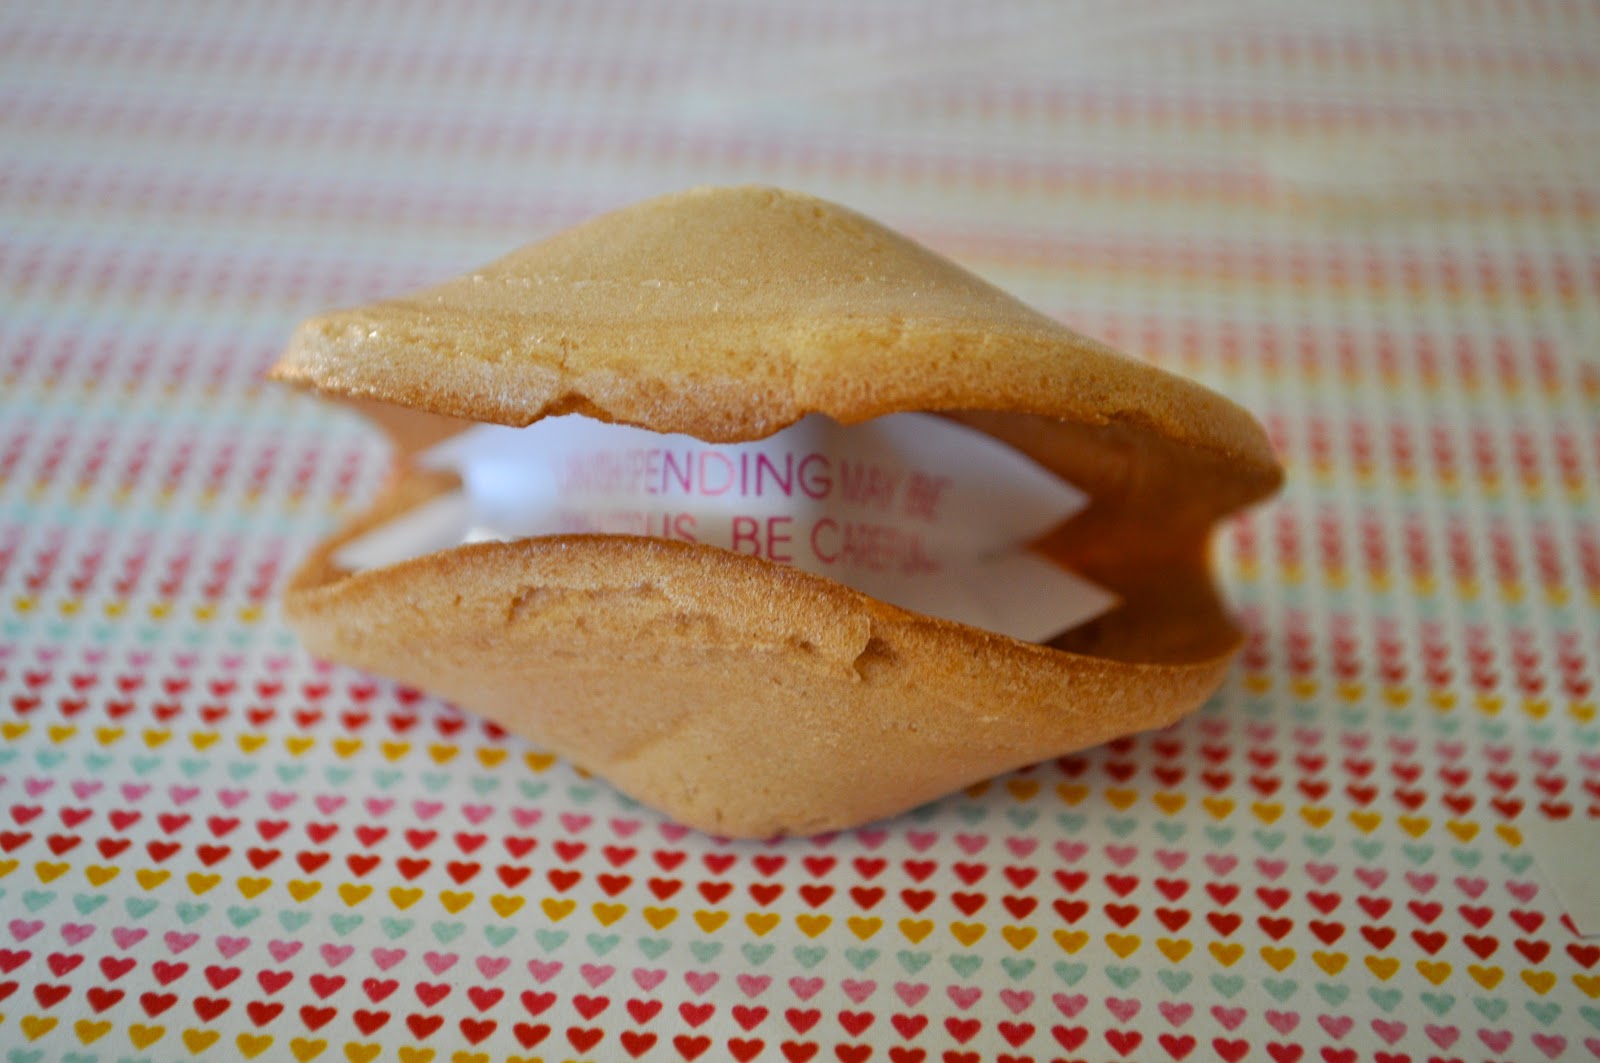 Romantic Valentine Fortune Cookies: Remove Boring Fortunes & Add Your Own  Steamy Fortunes! - Make Life Lovely